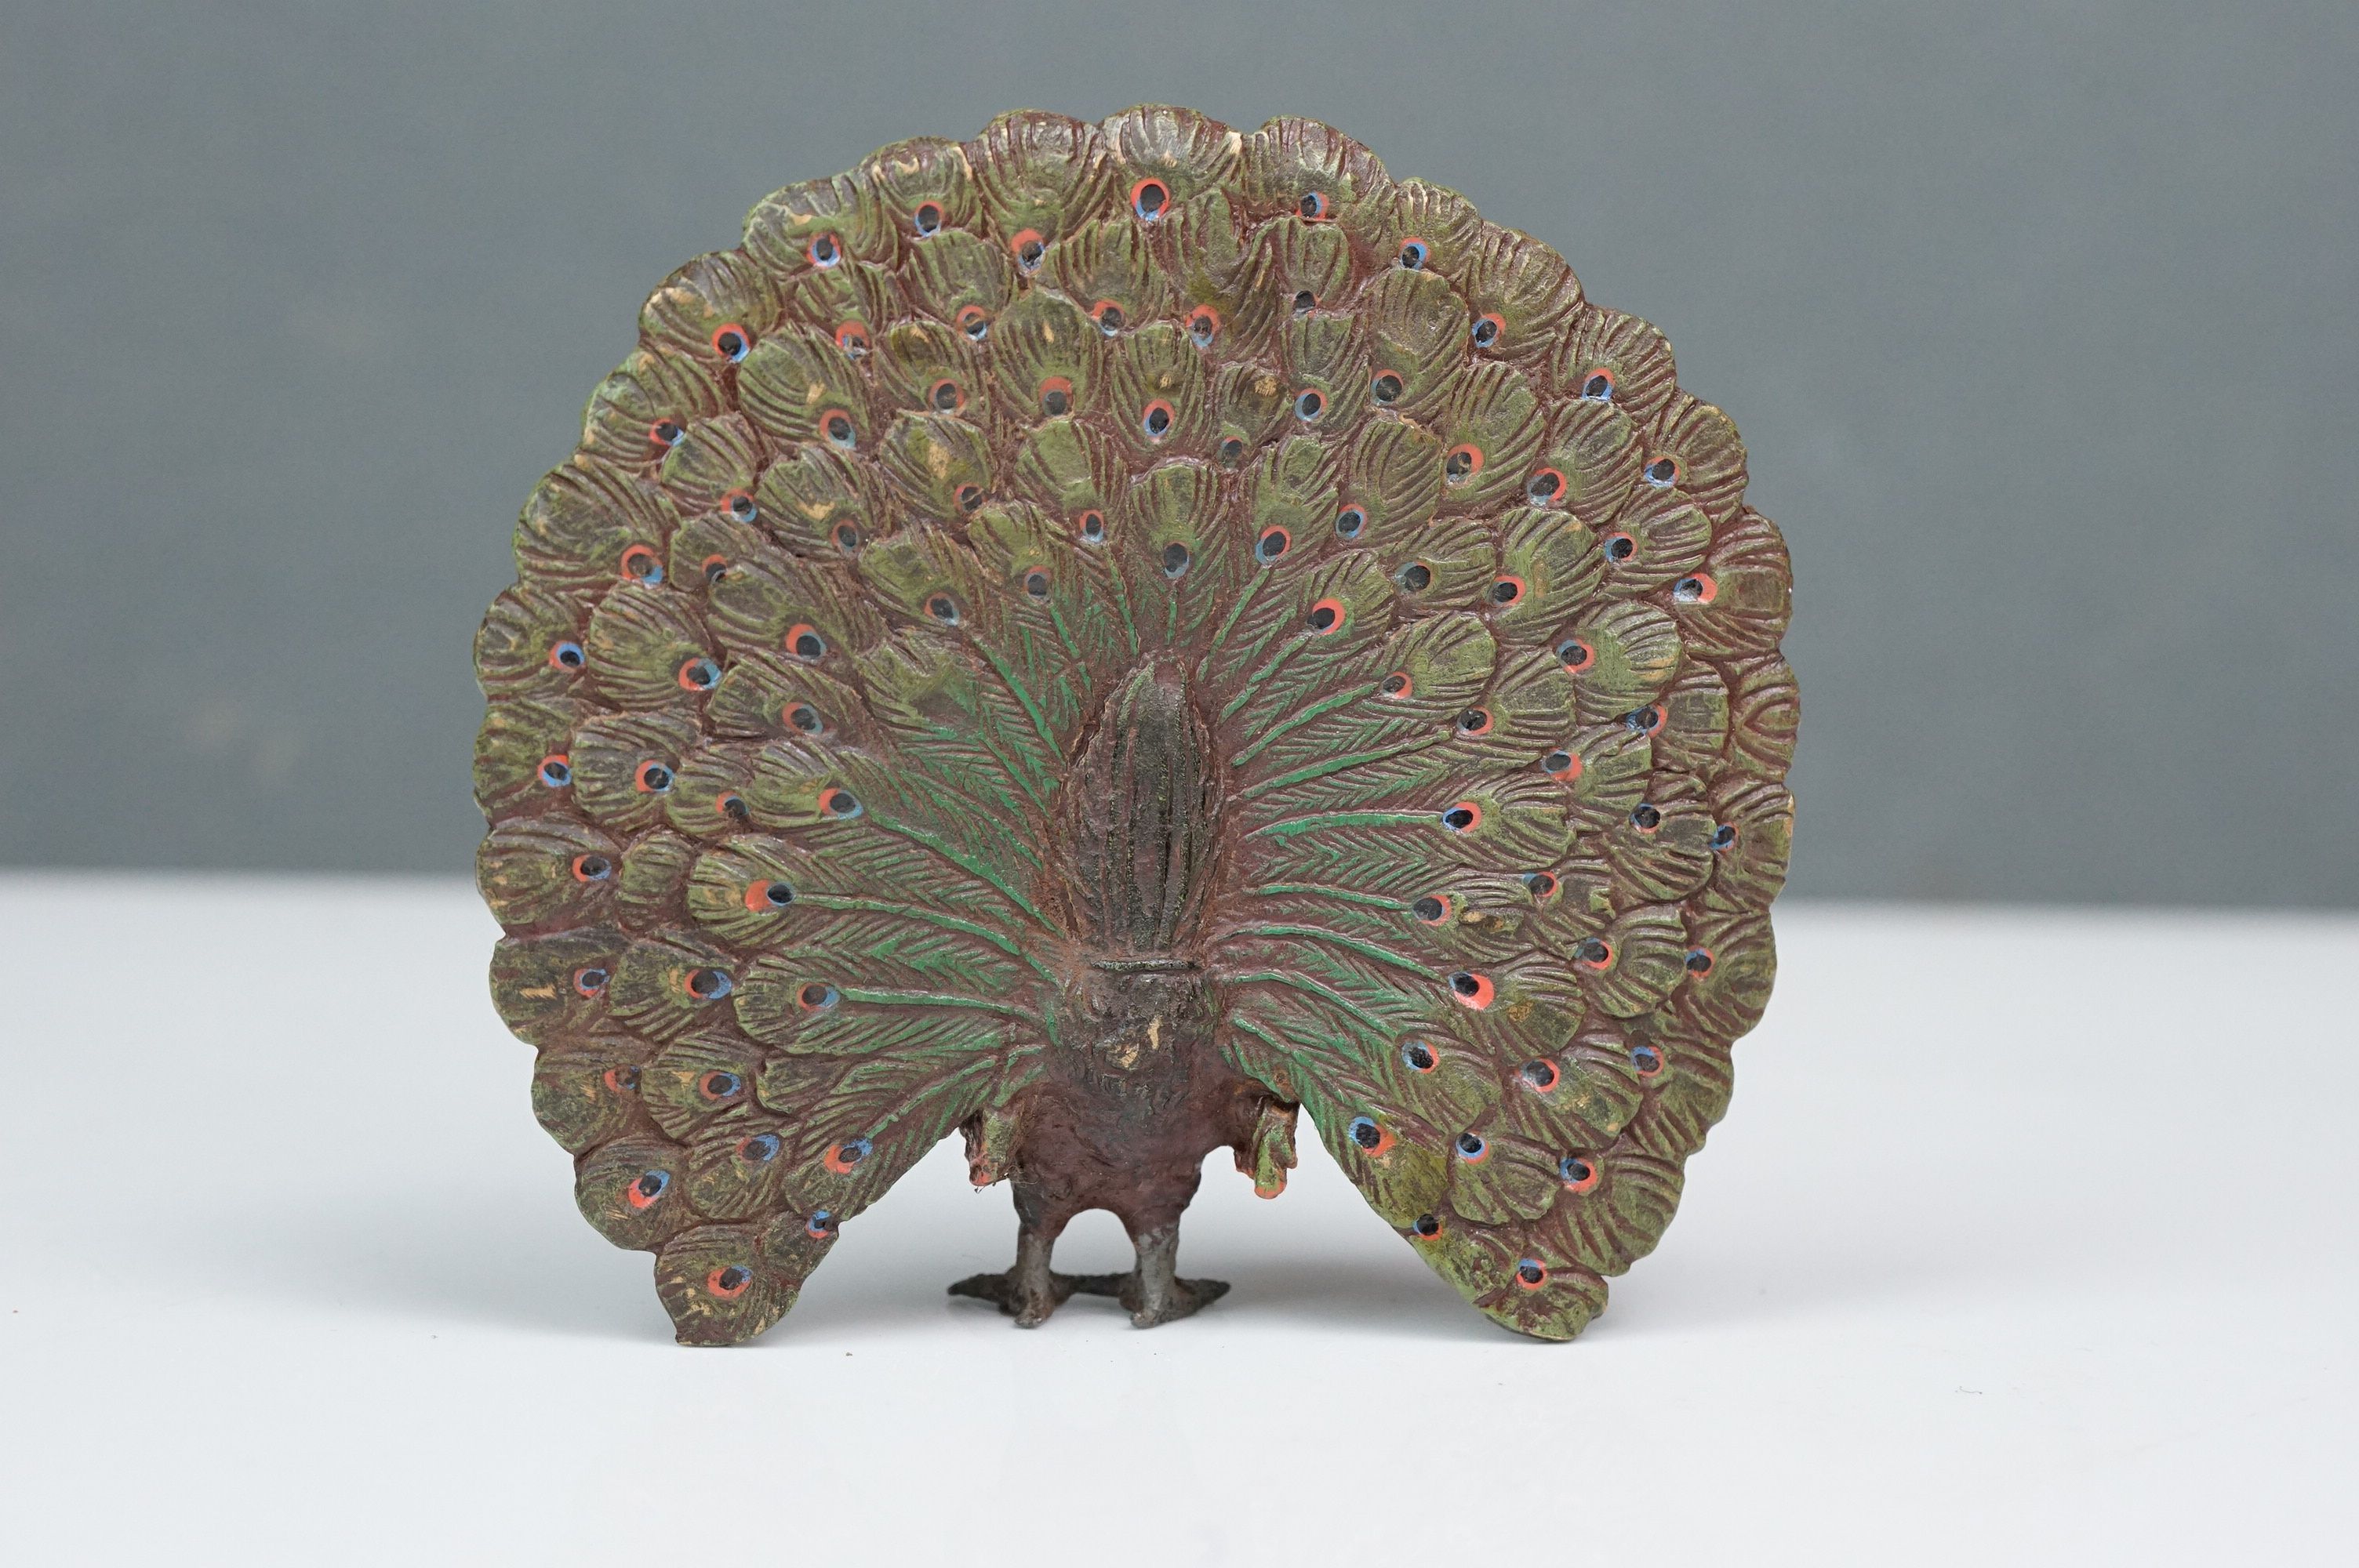 Cold painted bronze figure of a peacock with extended feathers - Image 4 of 6